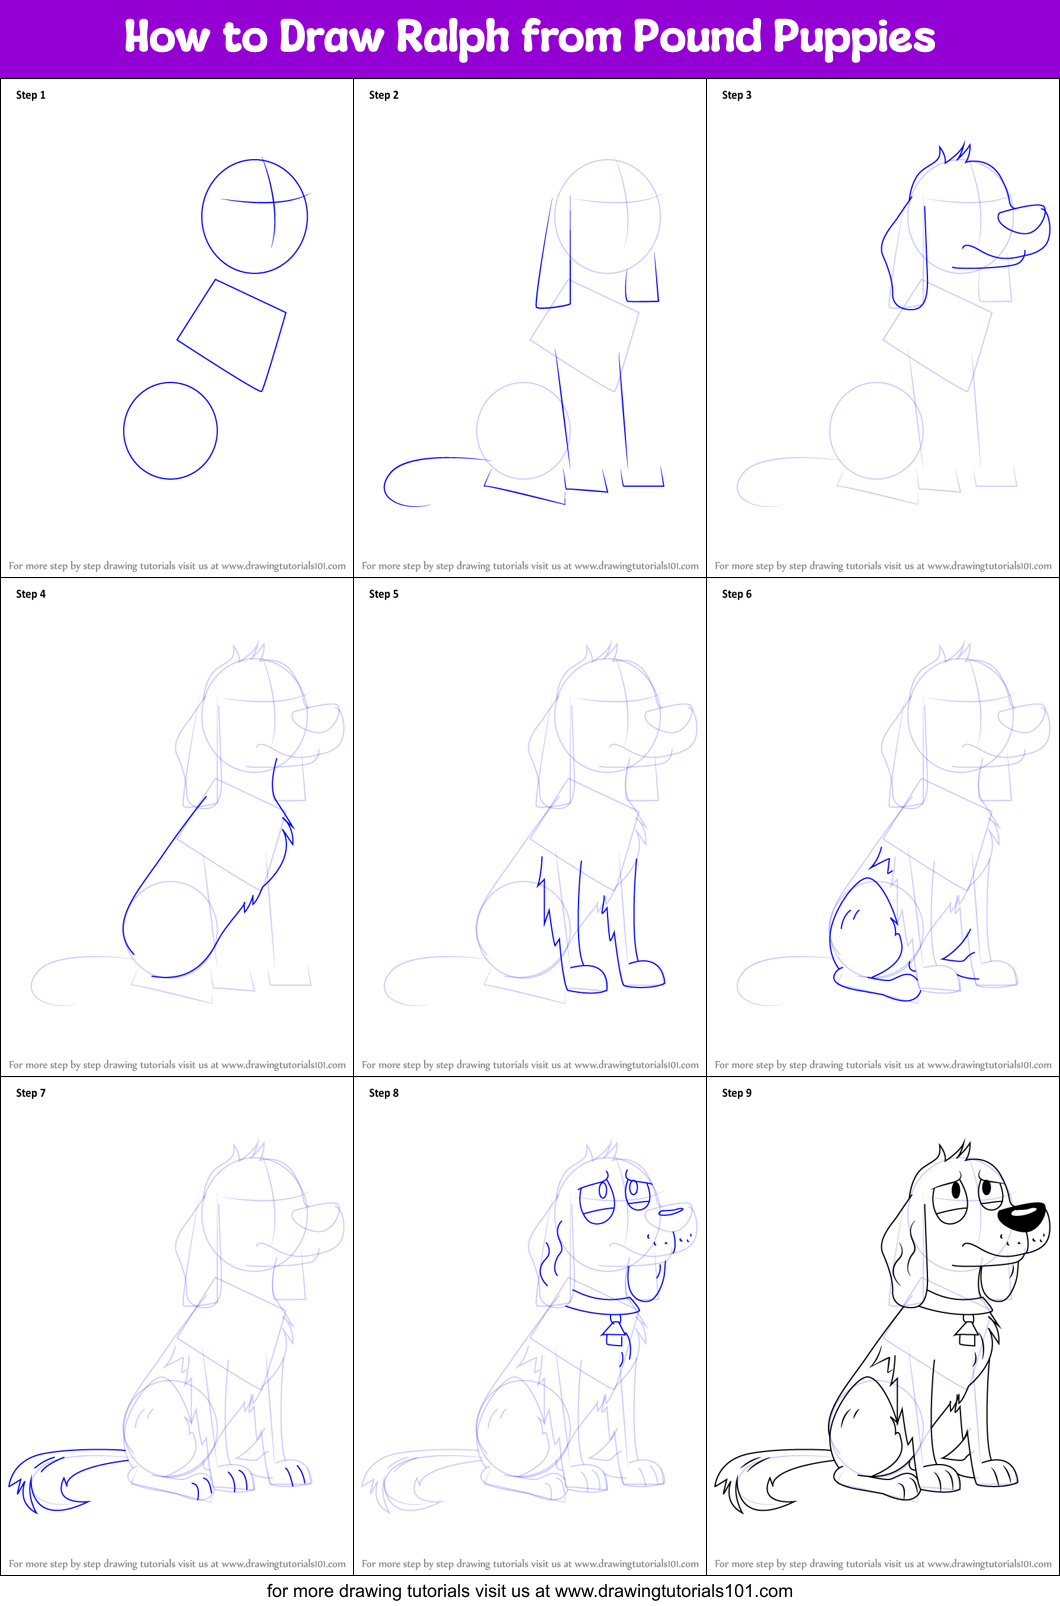 How to Draw Ralph from Pound Puppies (Pound Puppies) Step by Step